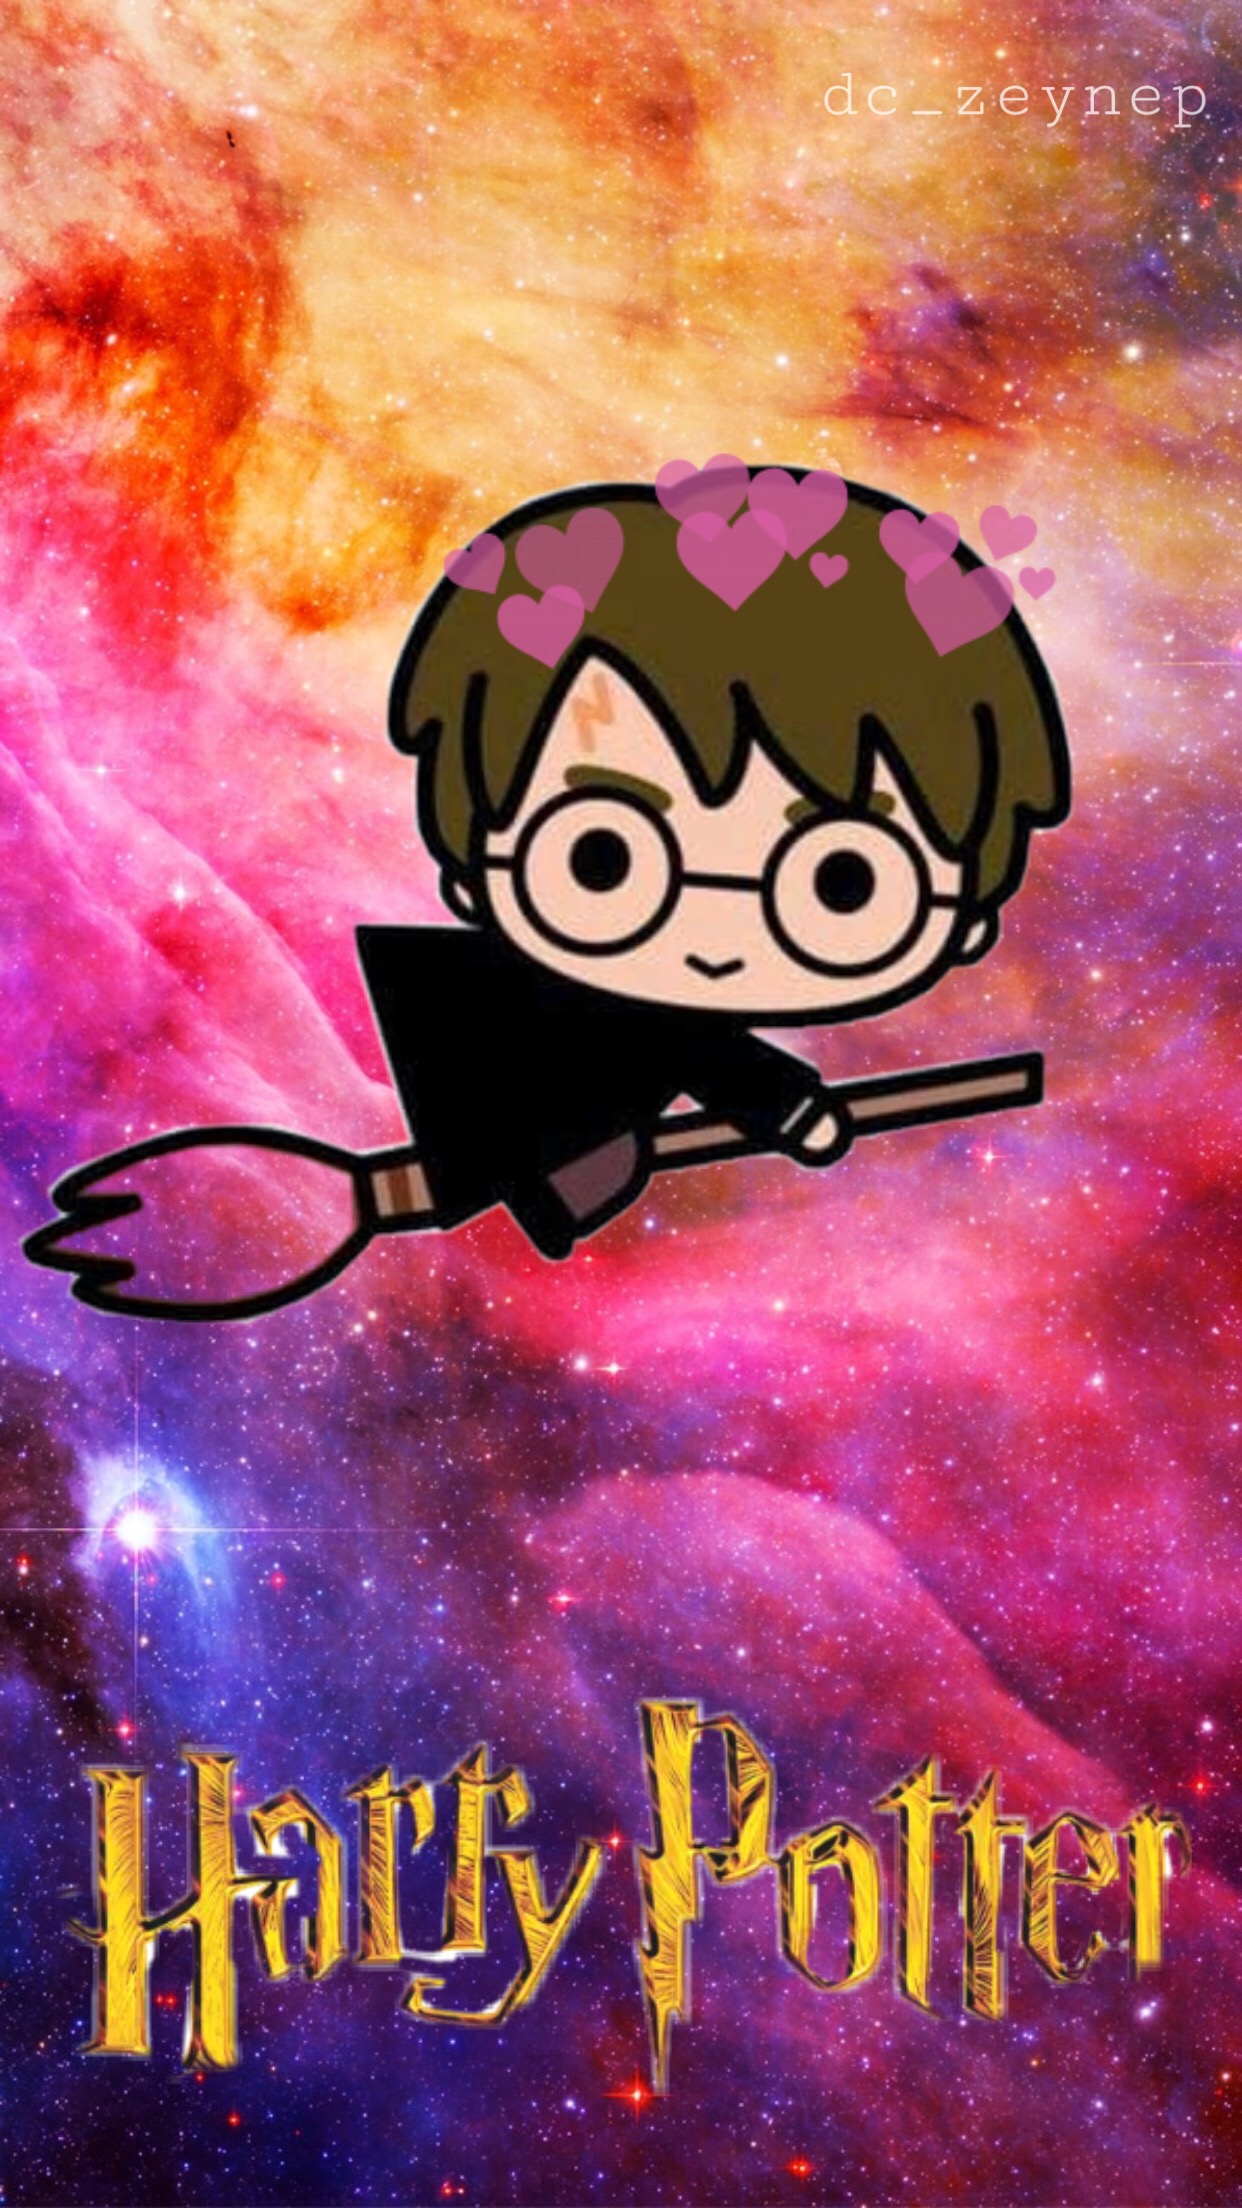 Harry Potter Wallpaper 💕✨💙 - Mars And Beyond Vbs Background - HD Wallpaper 